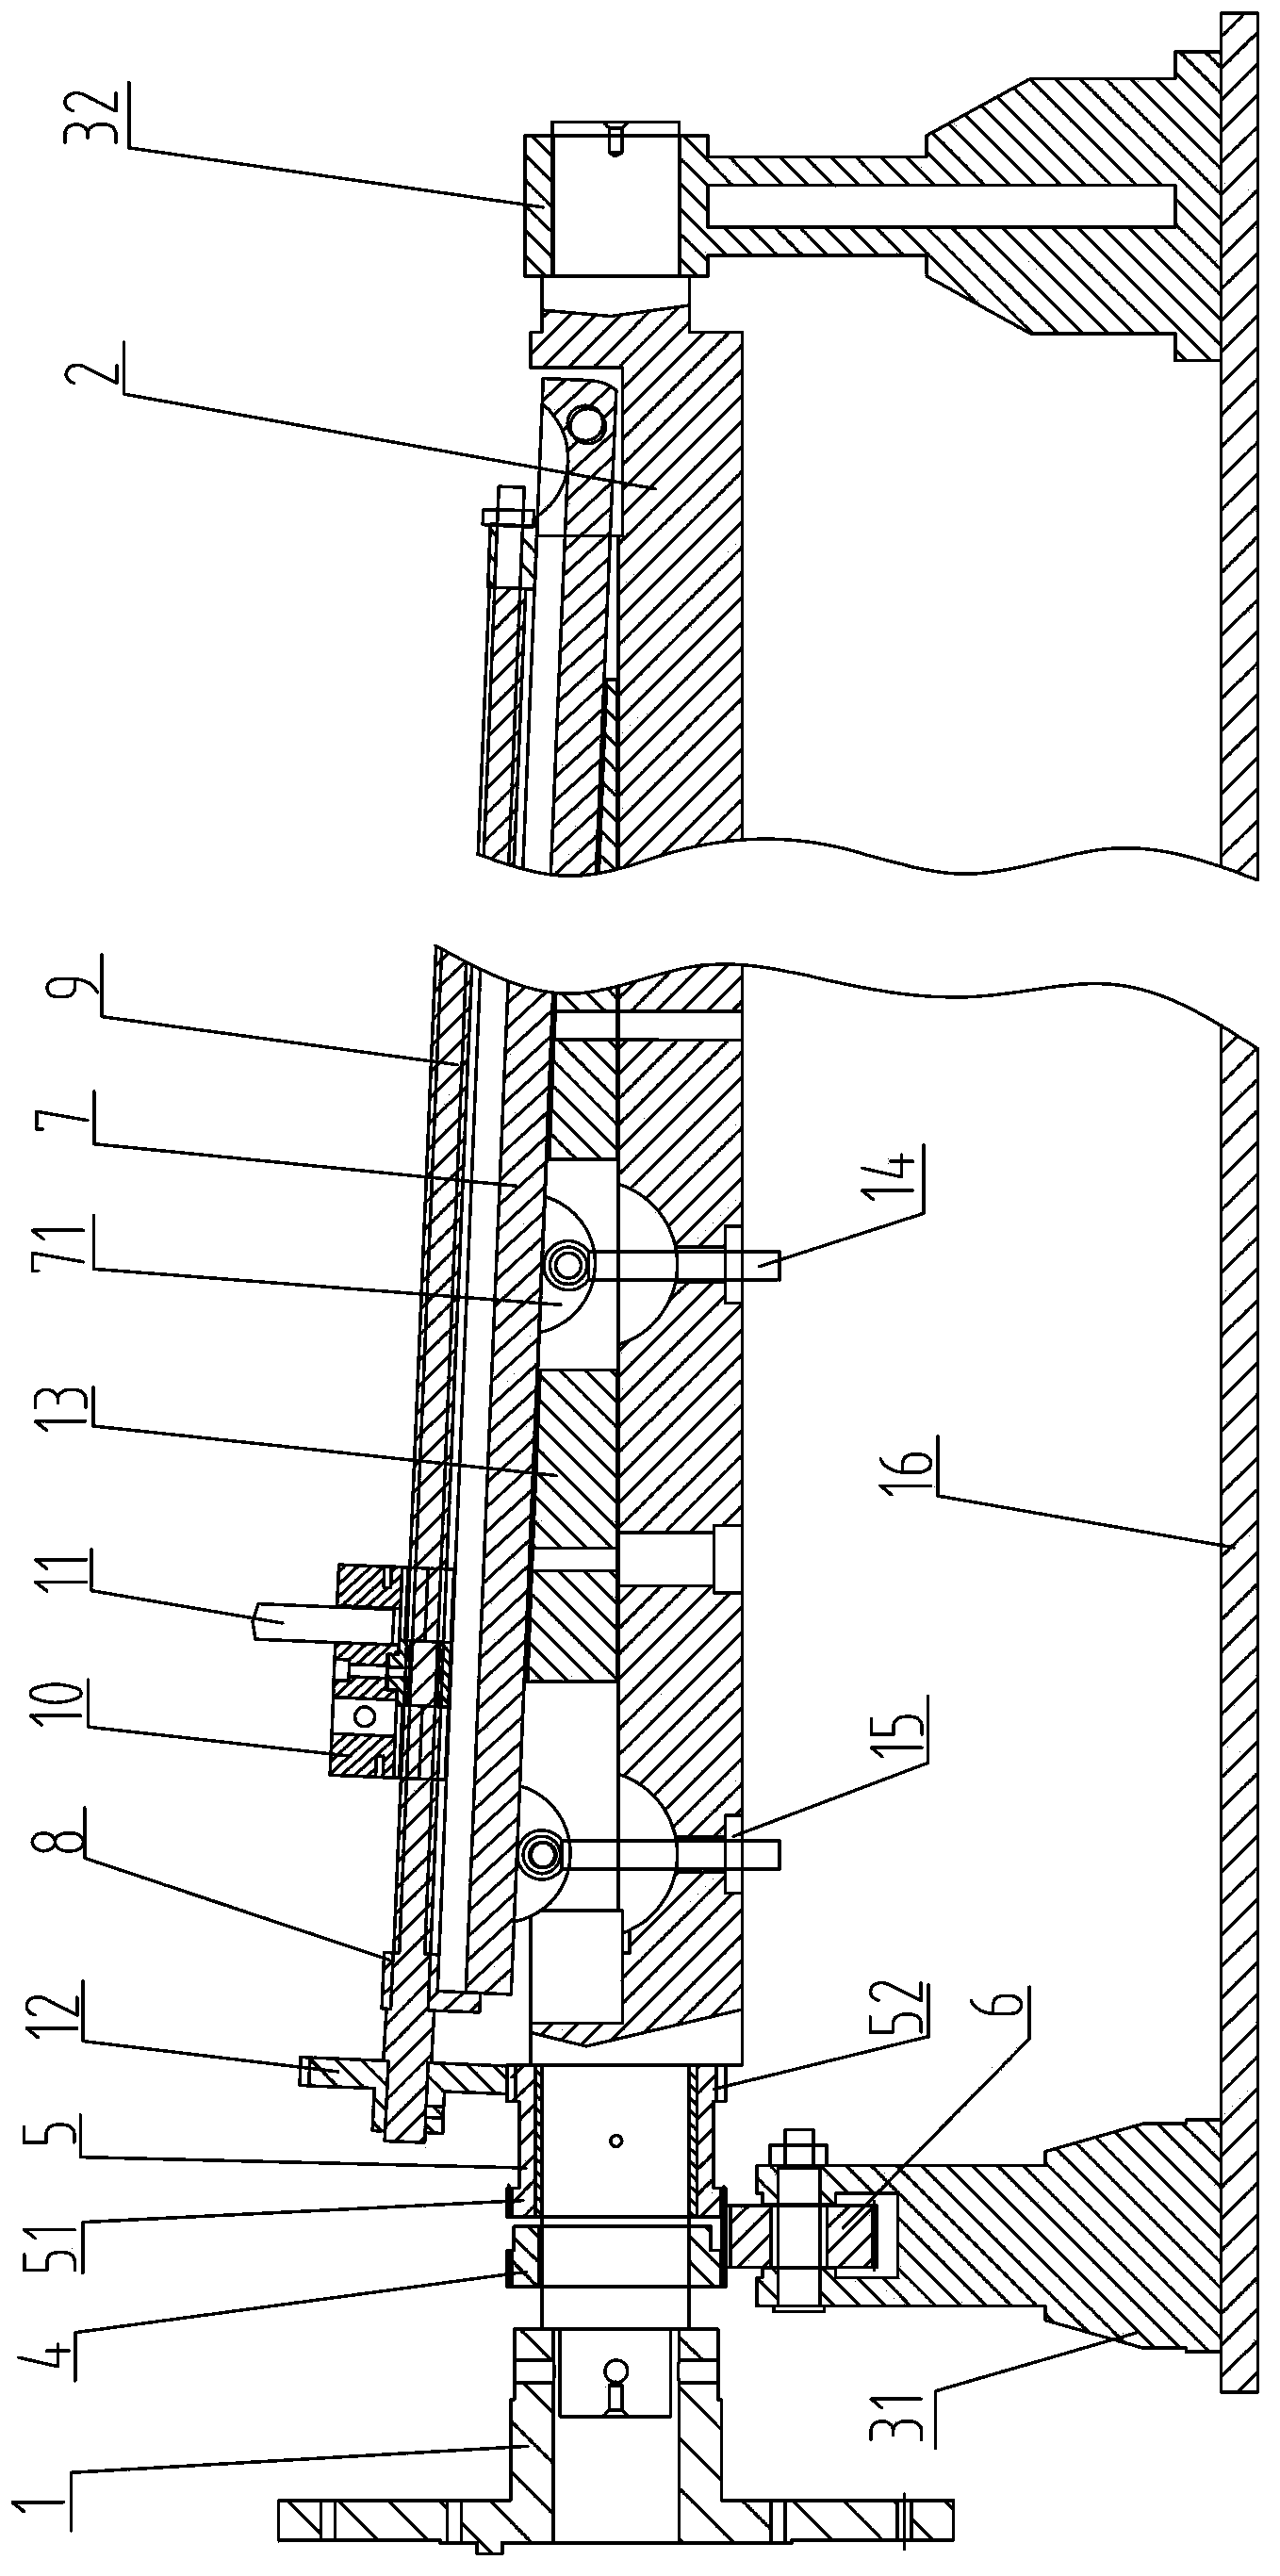 Device for assisting boring machine to process long conical through hole